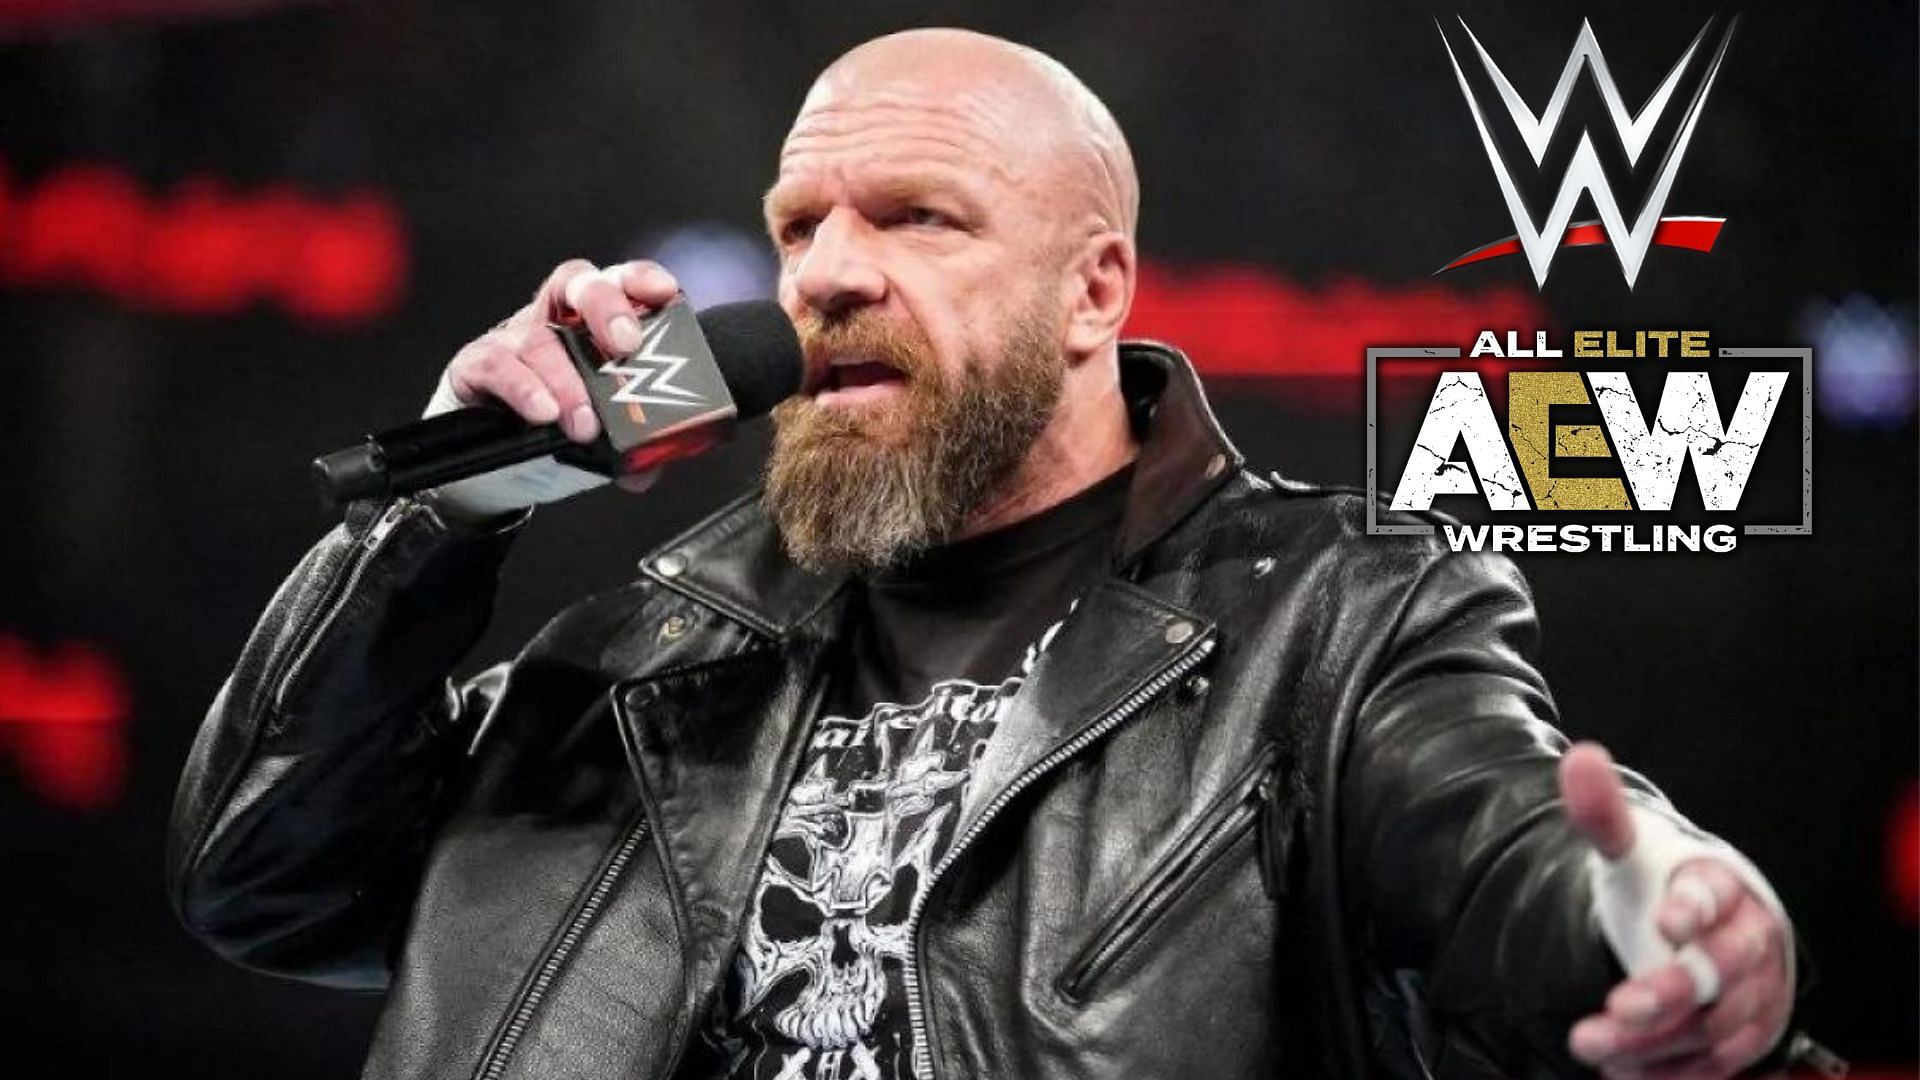 Triple H may potentially sign a major AEW star in the future